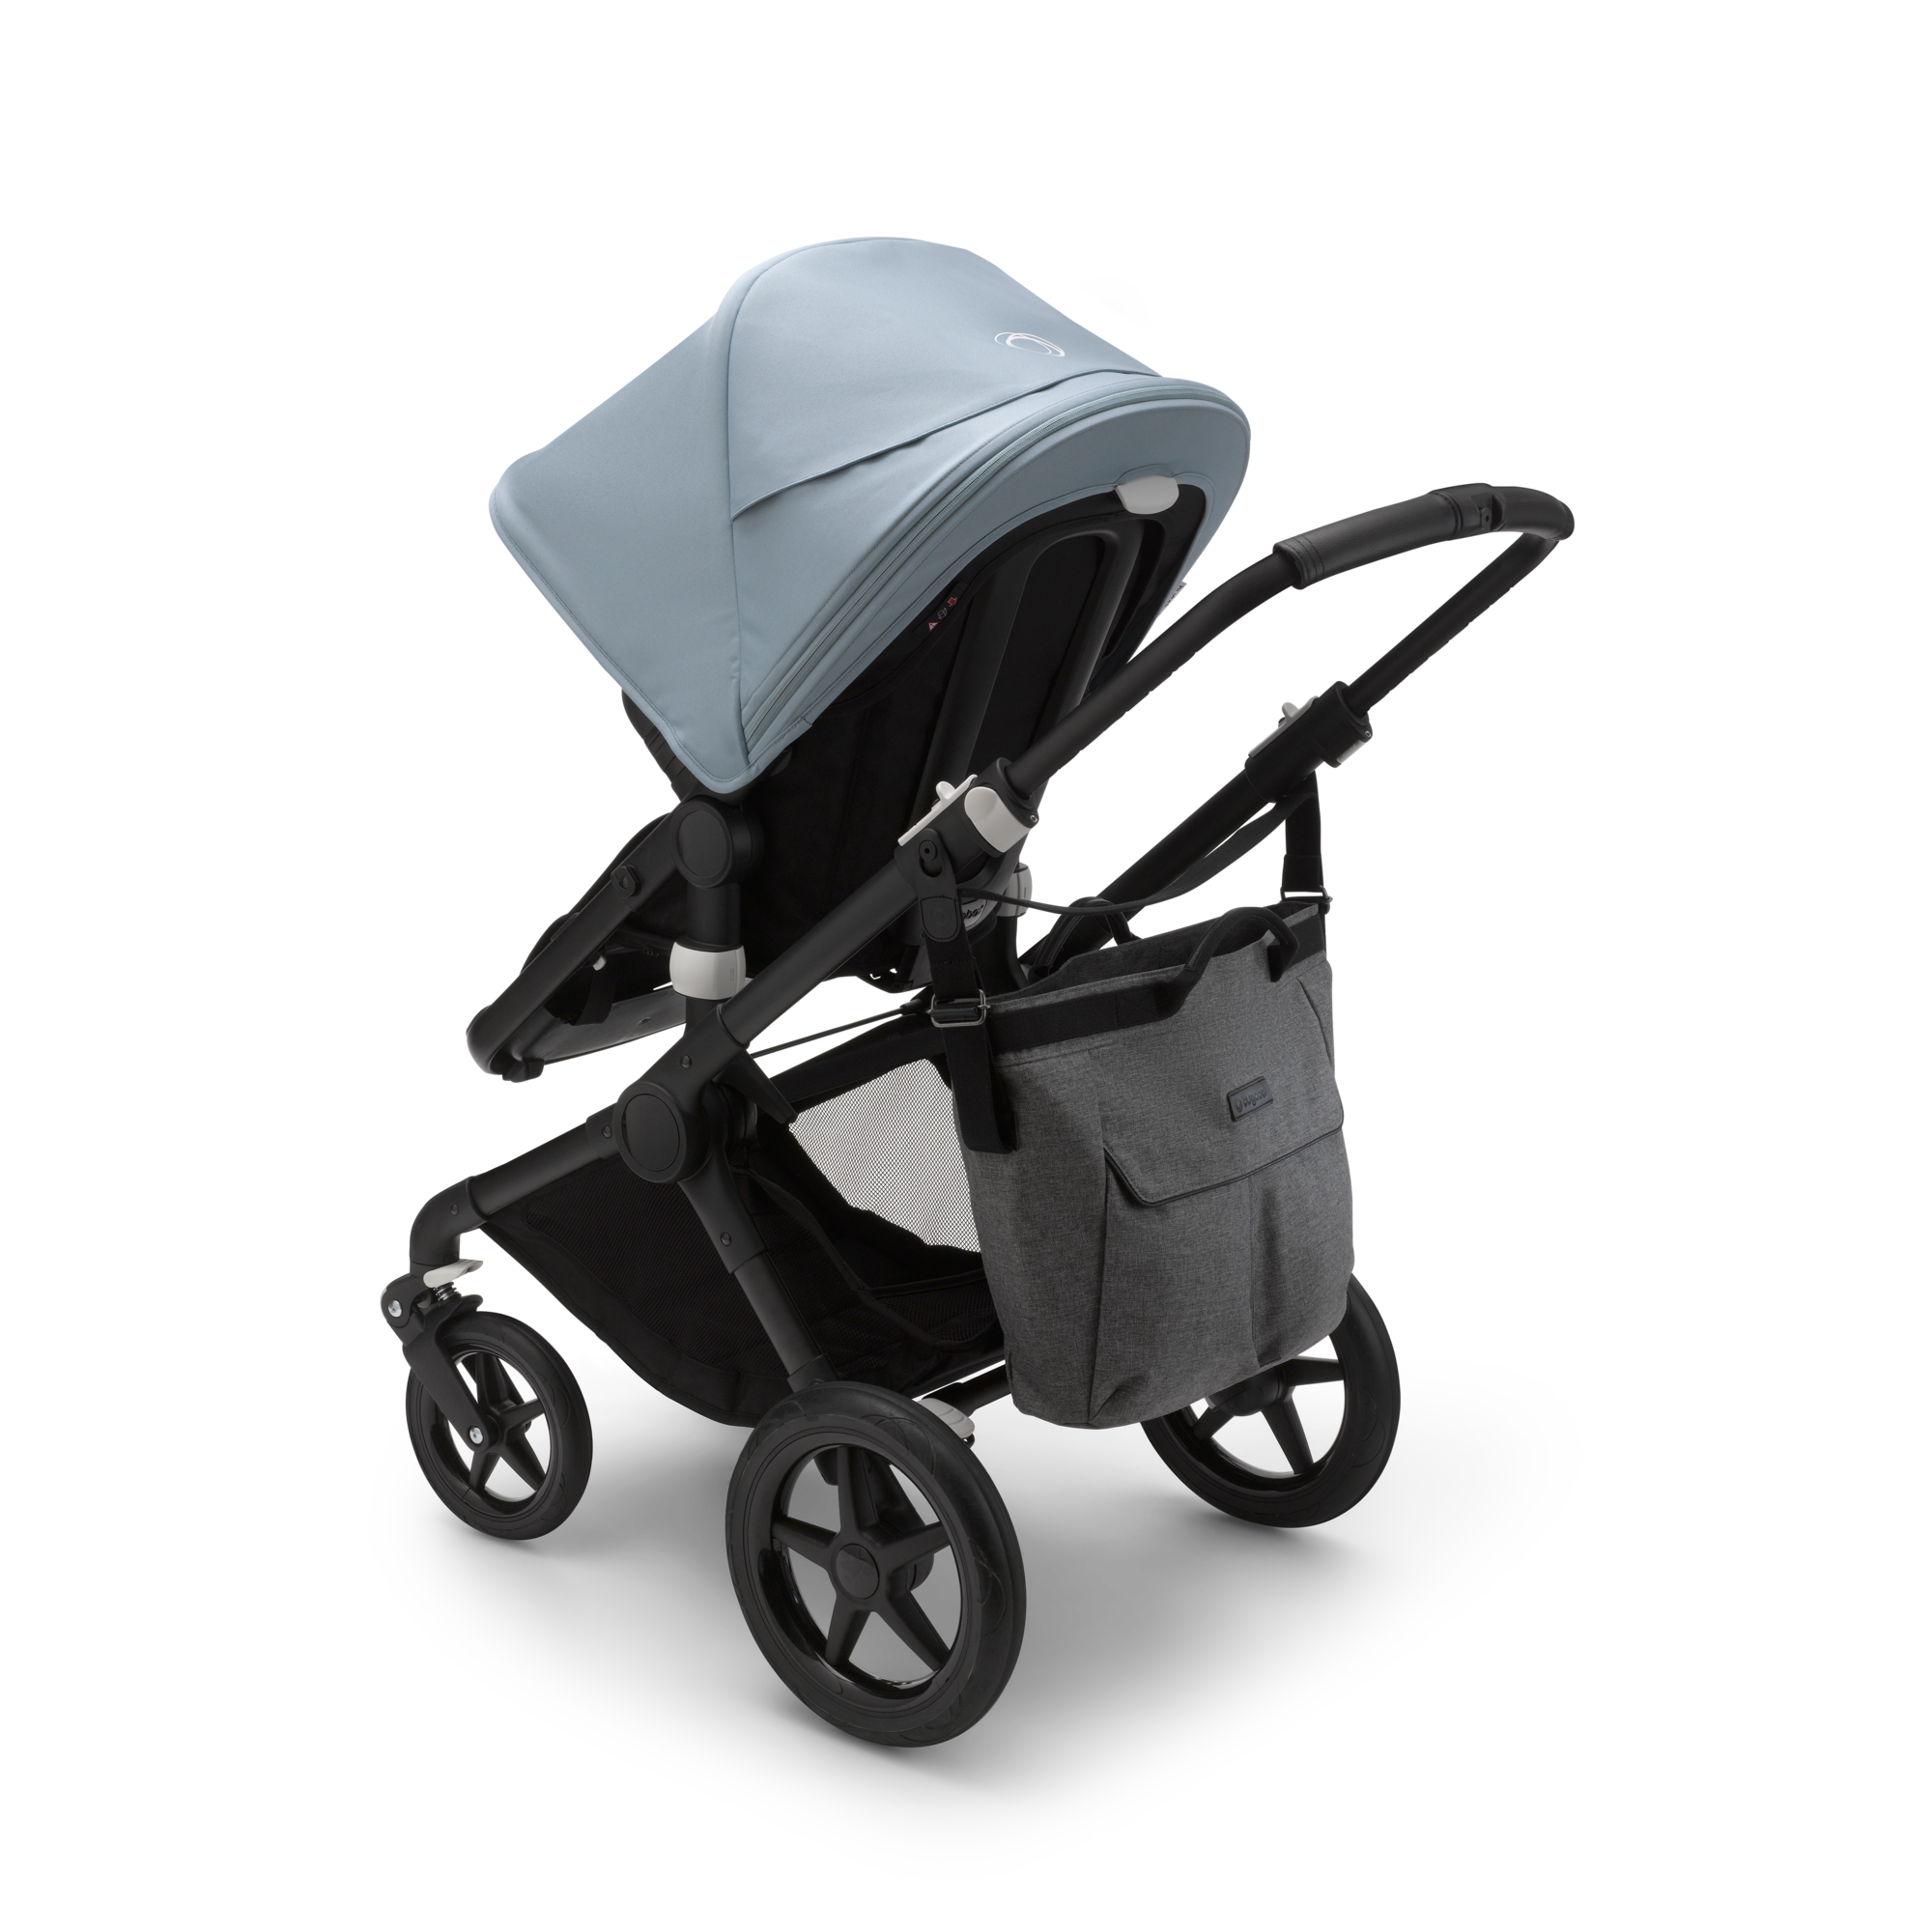 changing bugaboo fox bassinet to seat